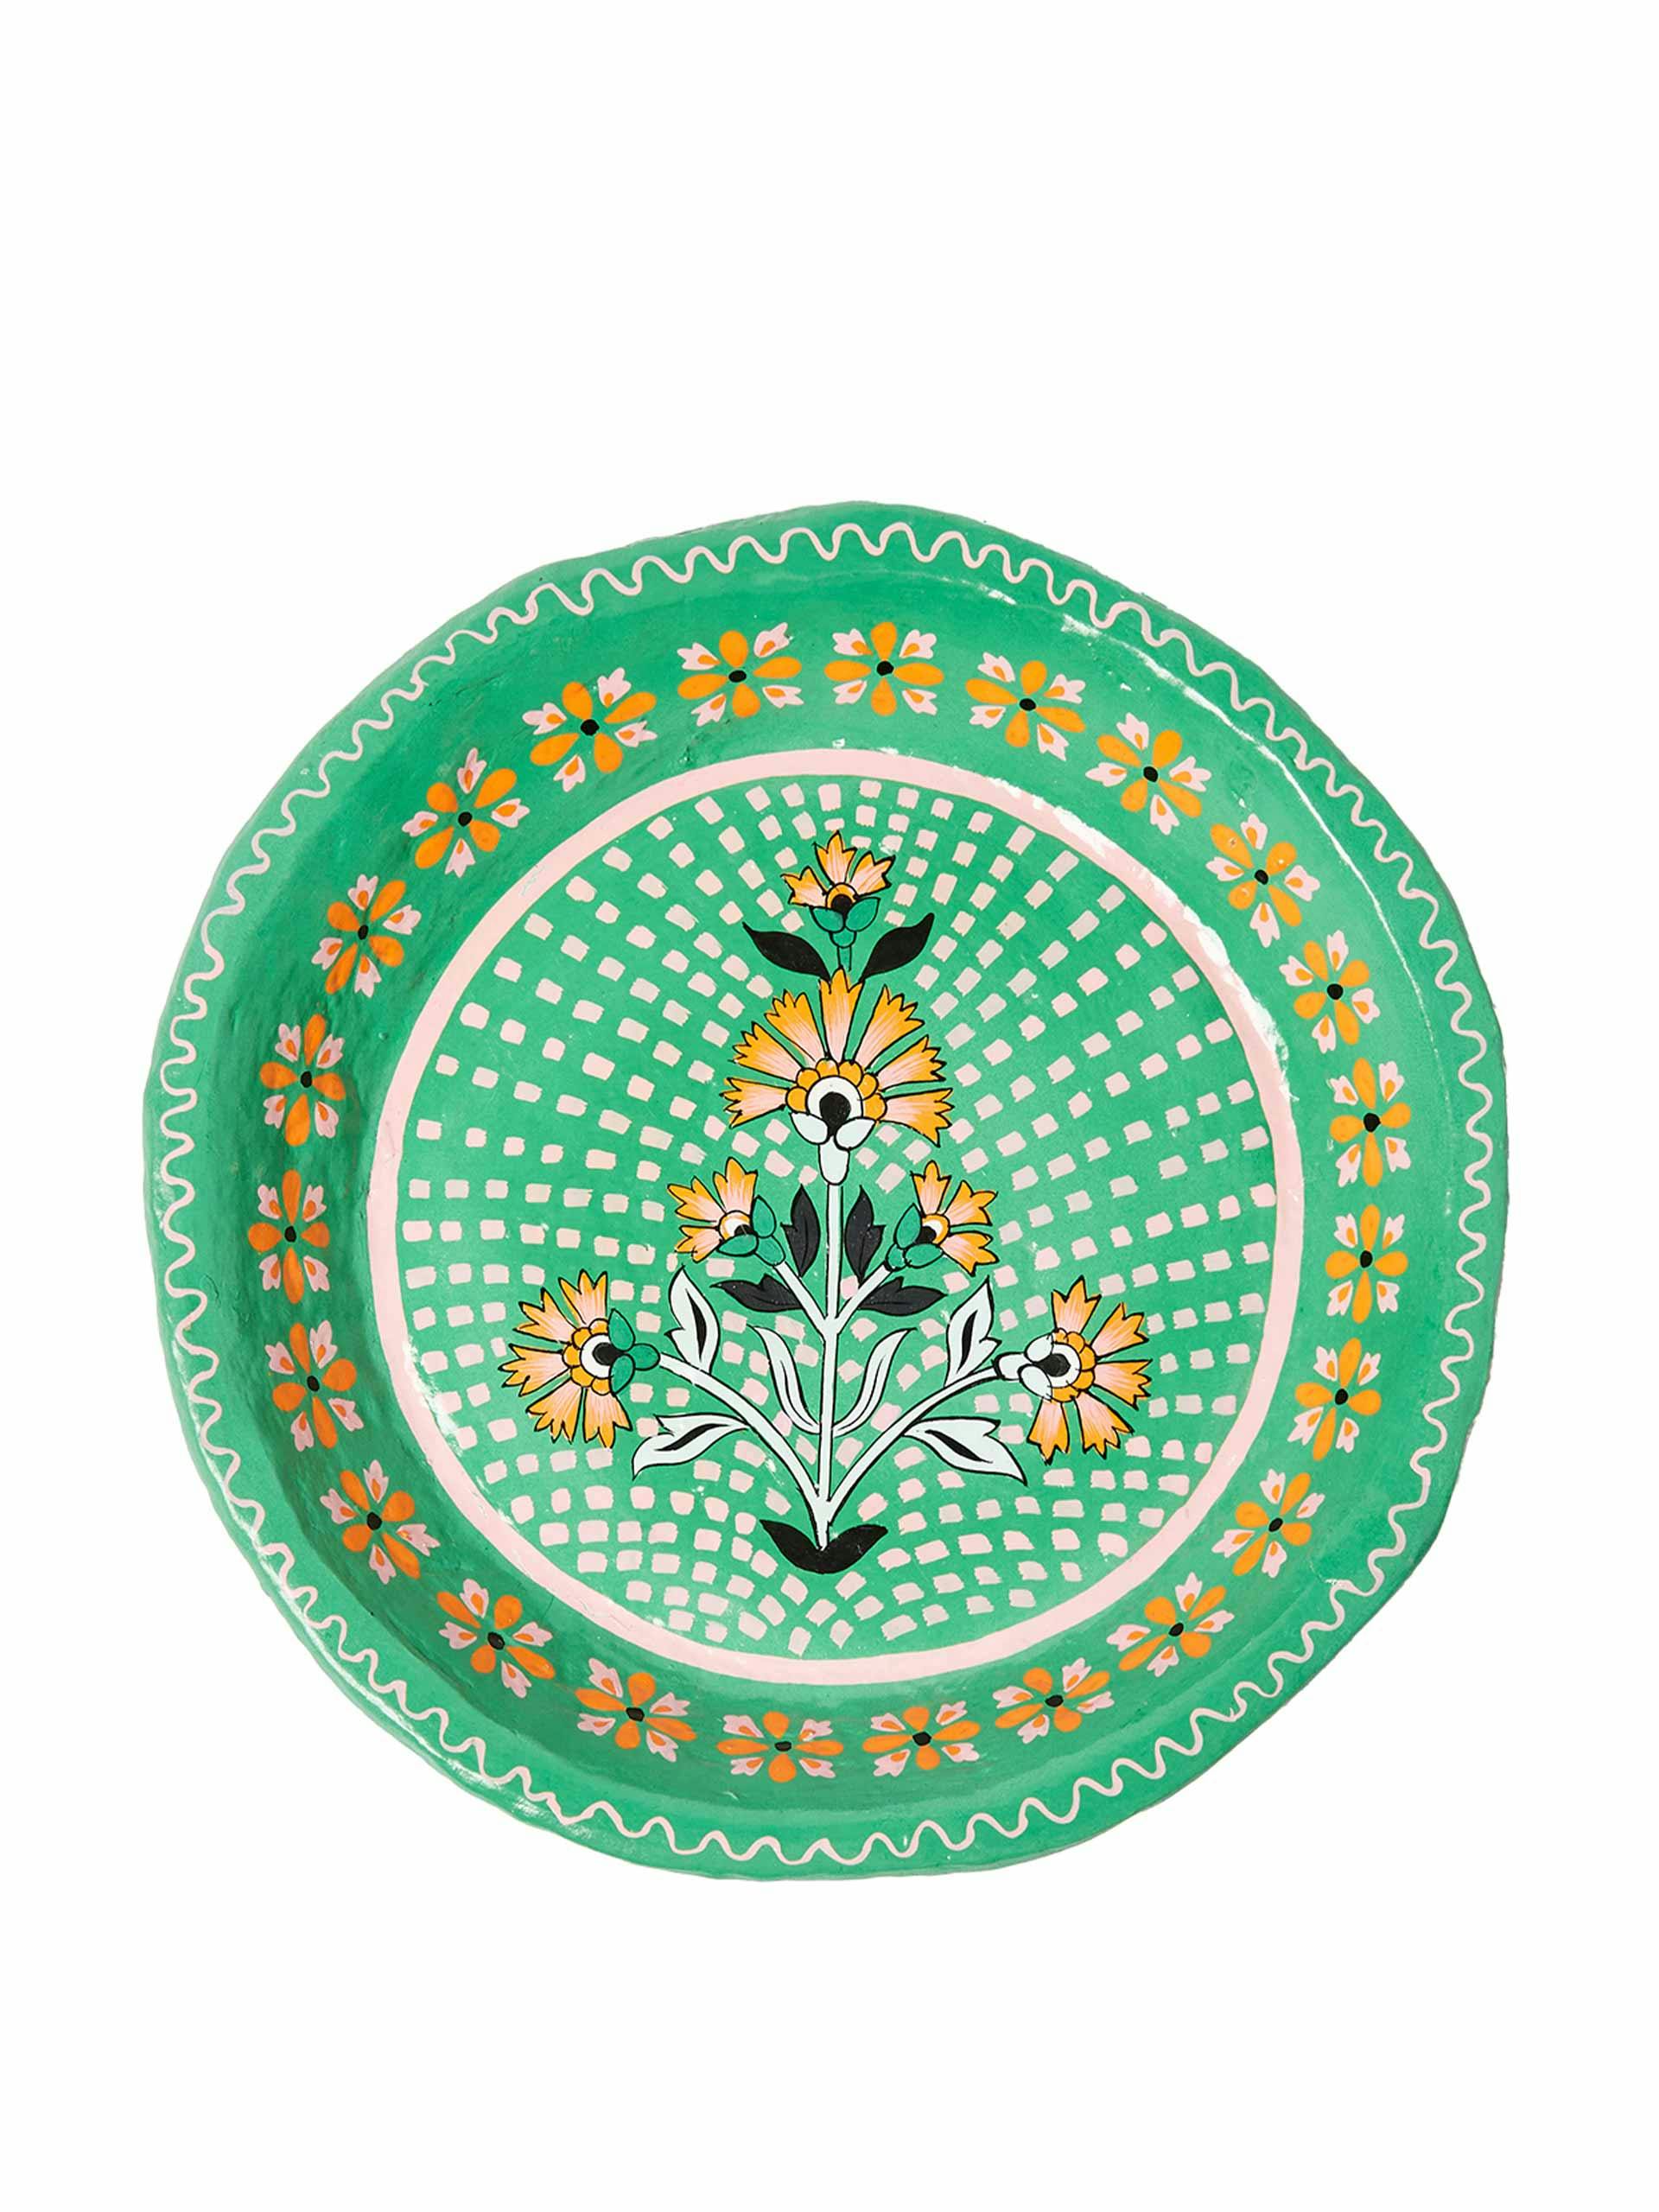 Akra hand-painted green paper mache bowl